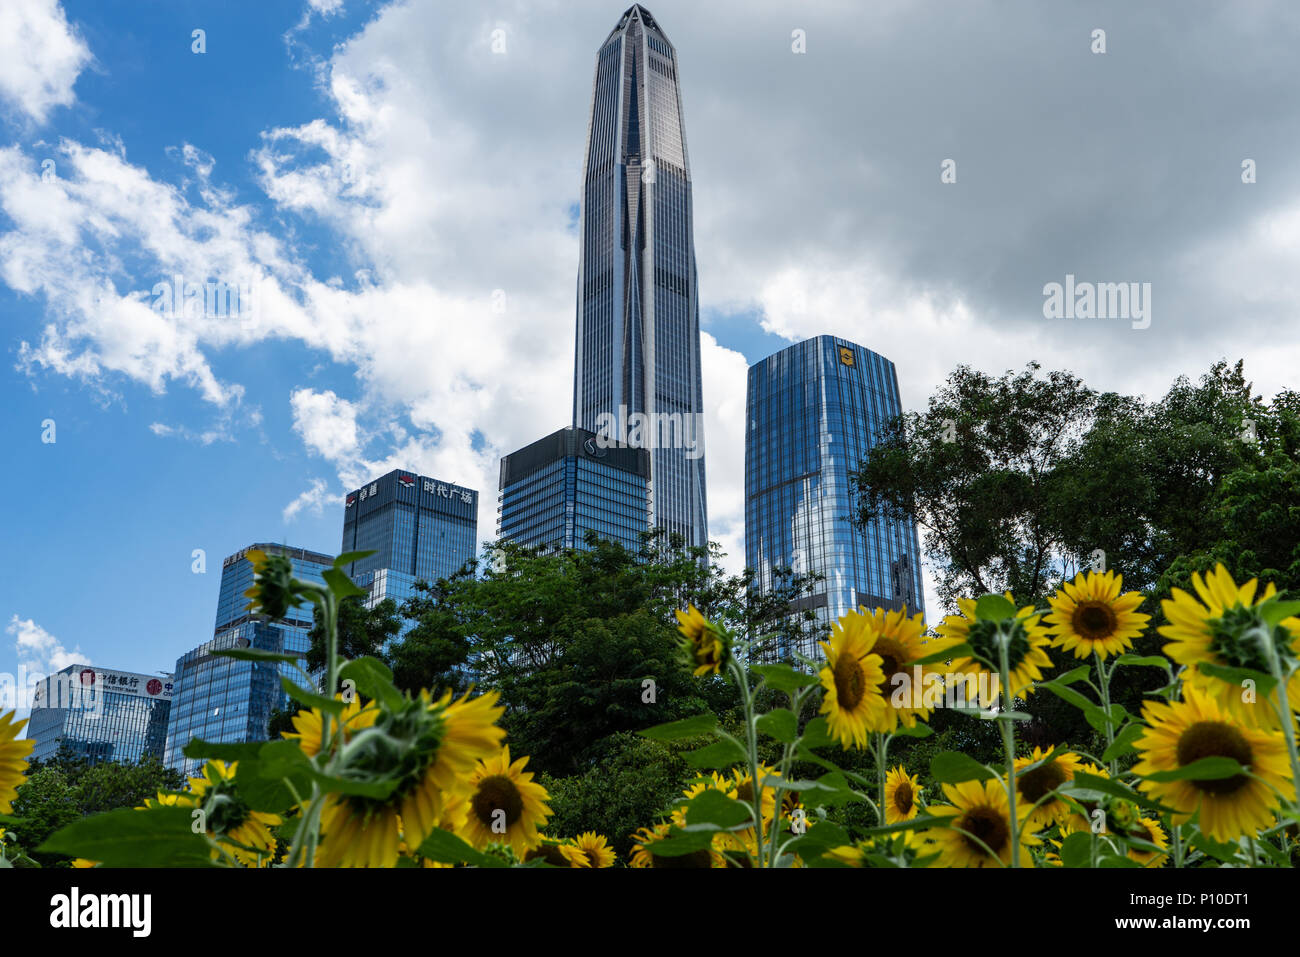 Shenzhen city skyline and cityscape with city's tallest building Ping An Stock Photo